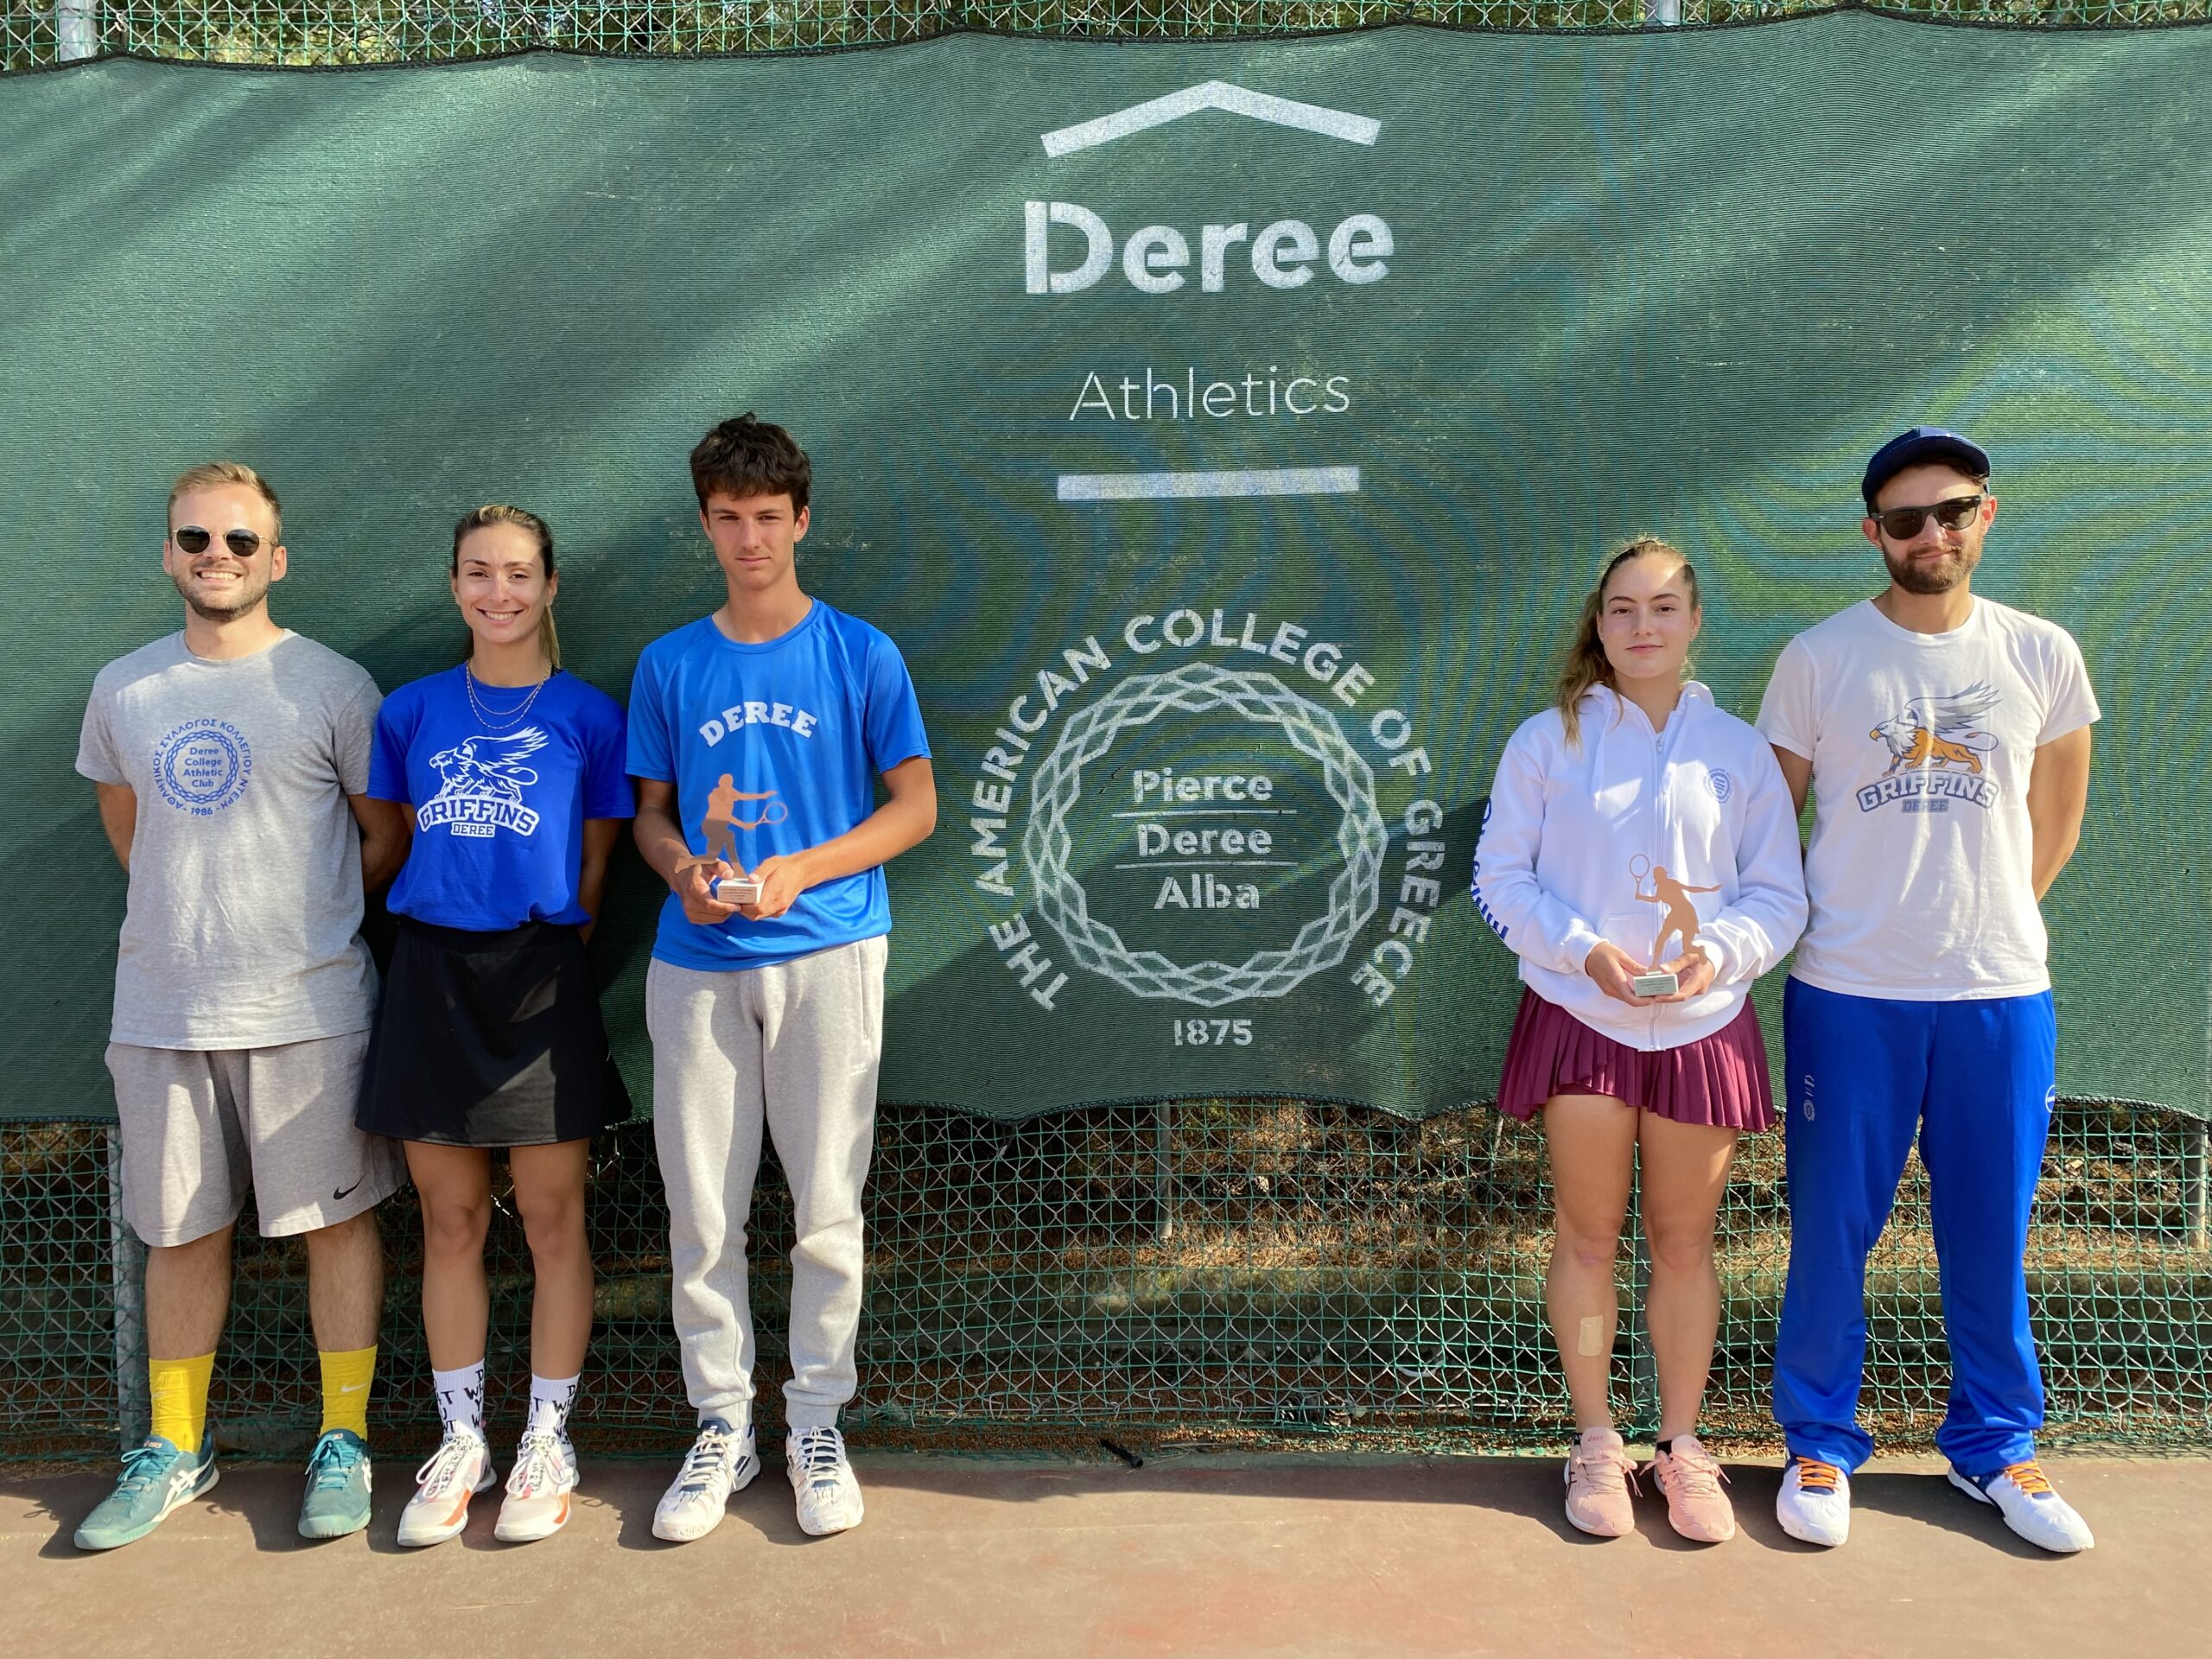 Successful participation for the Deree Tennis Academy in the E1 Panhellenic tennis tournament in Kilkis!